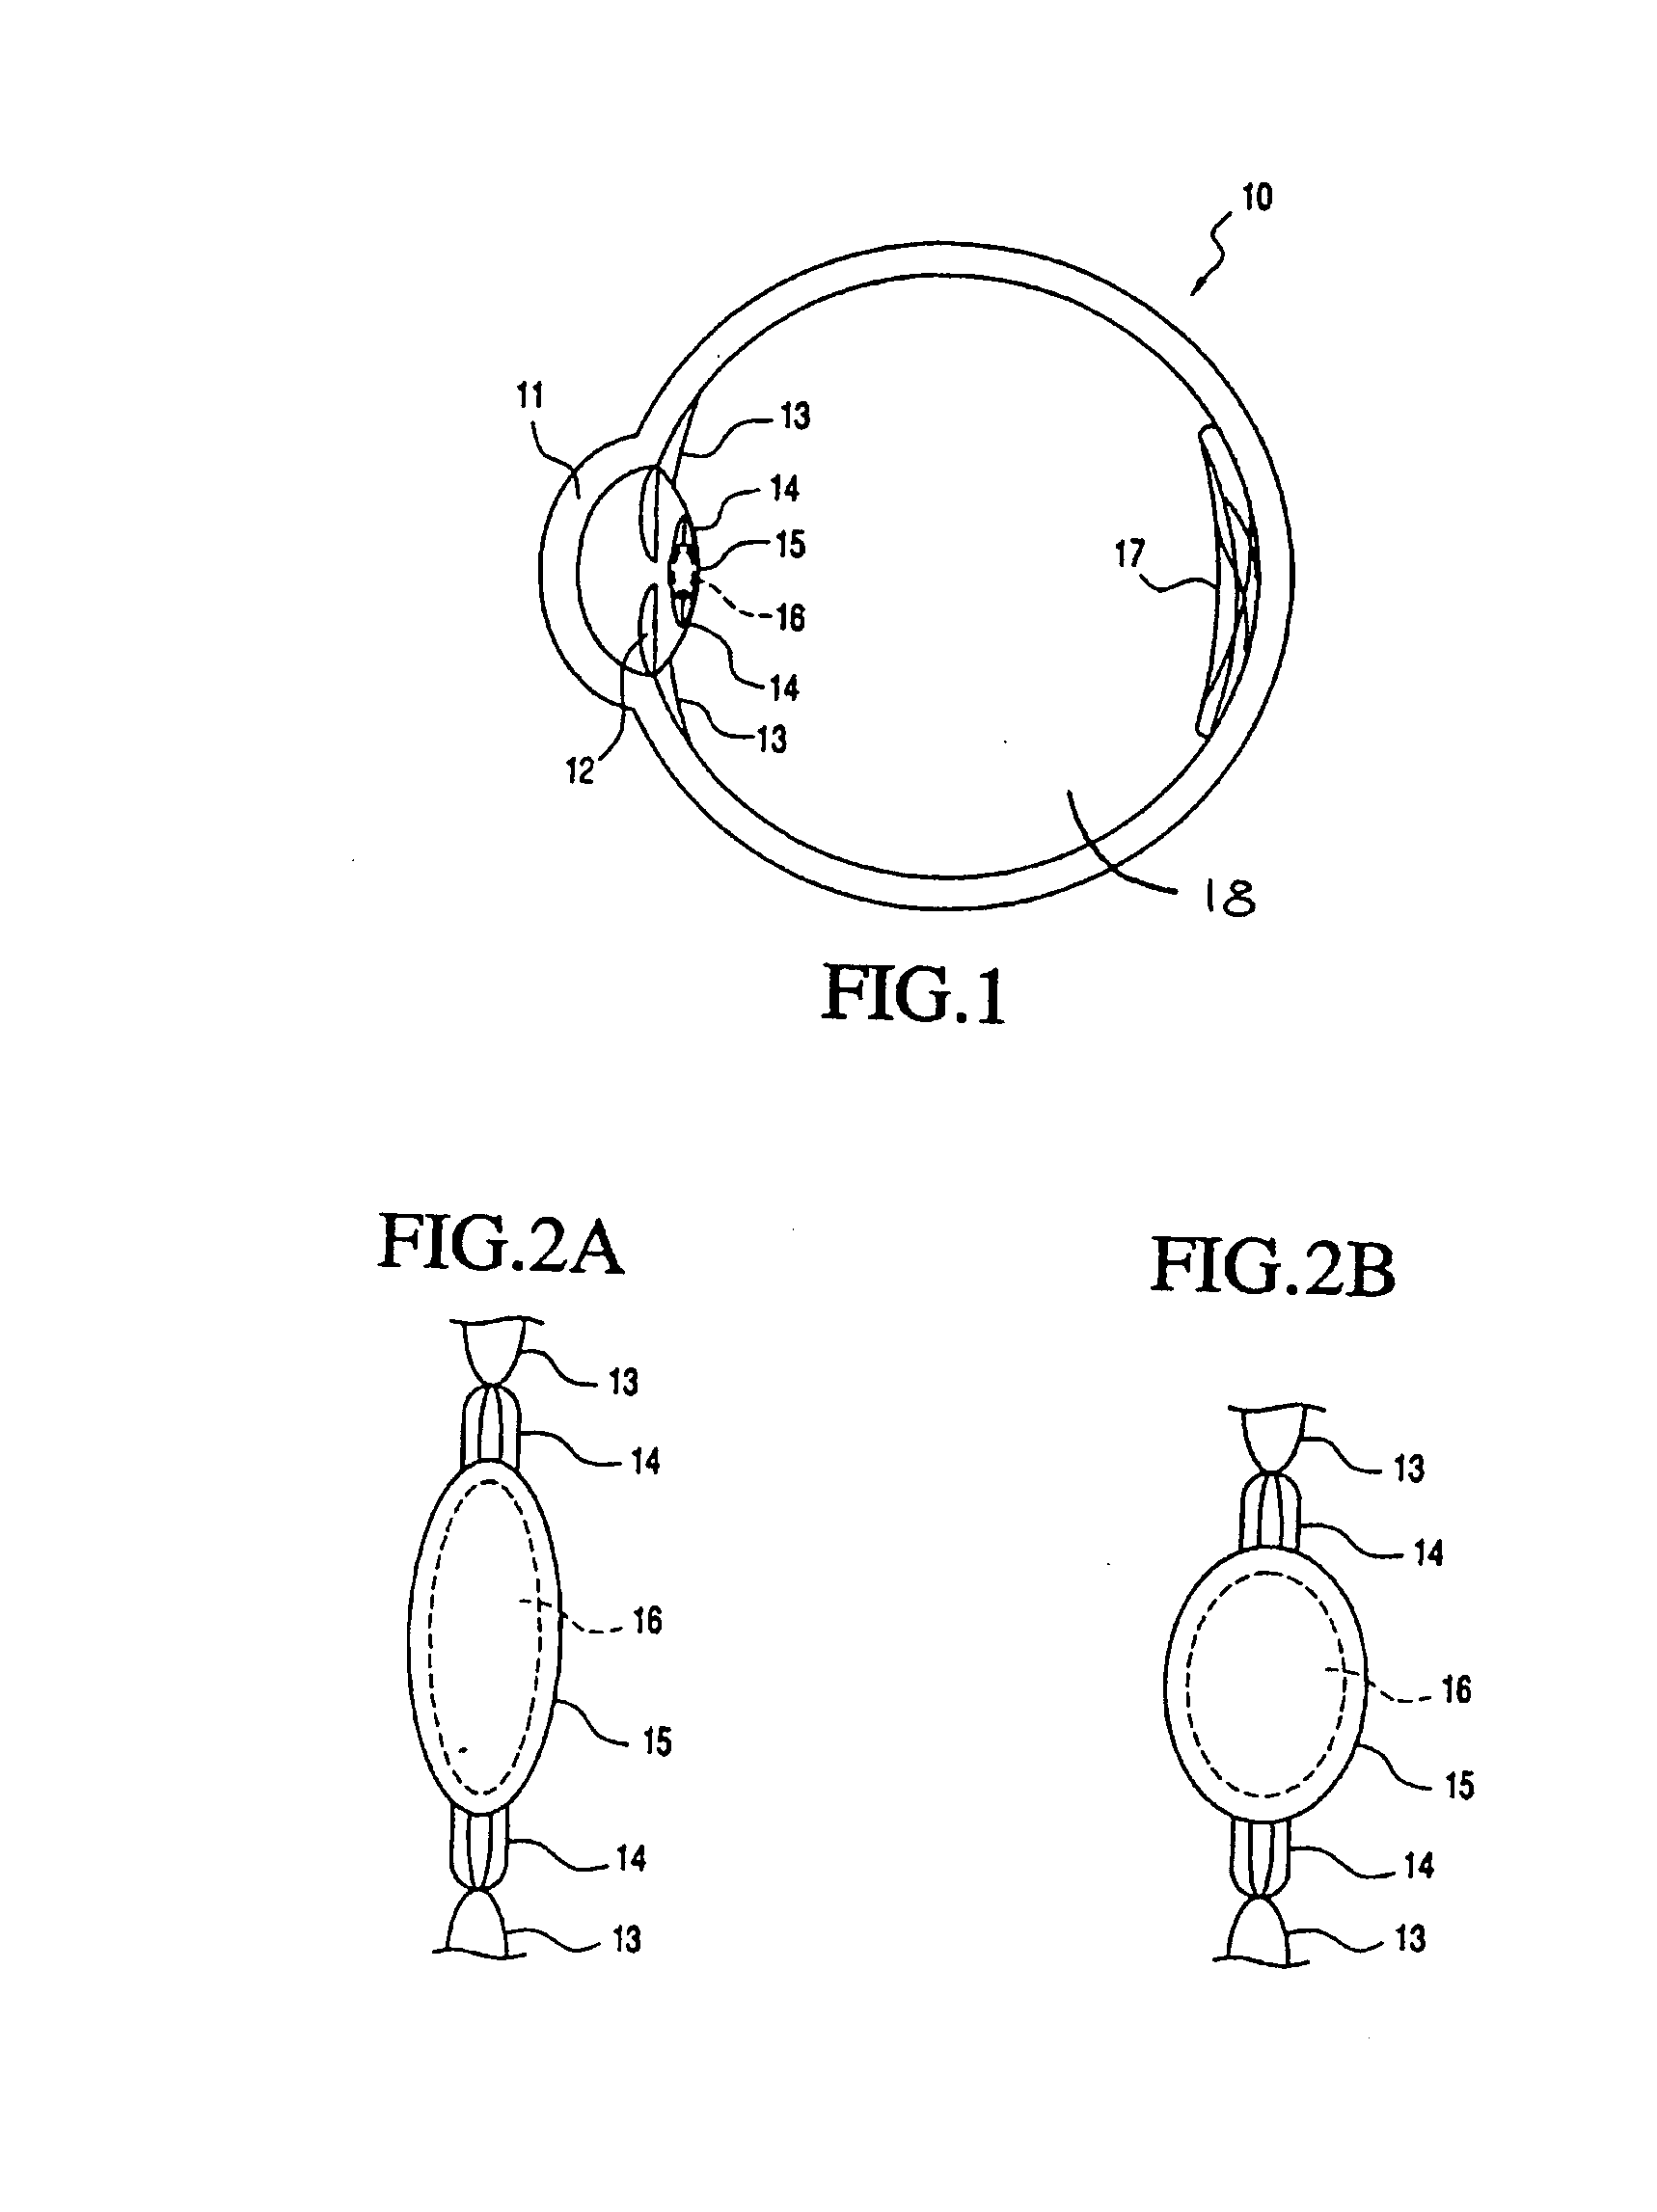 Accommodating intraocular lens system having spherical aberration compensation and method